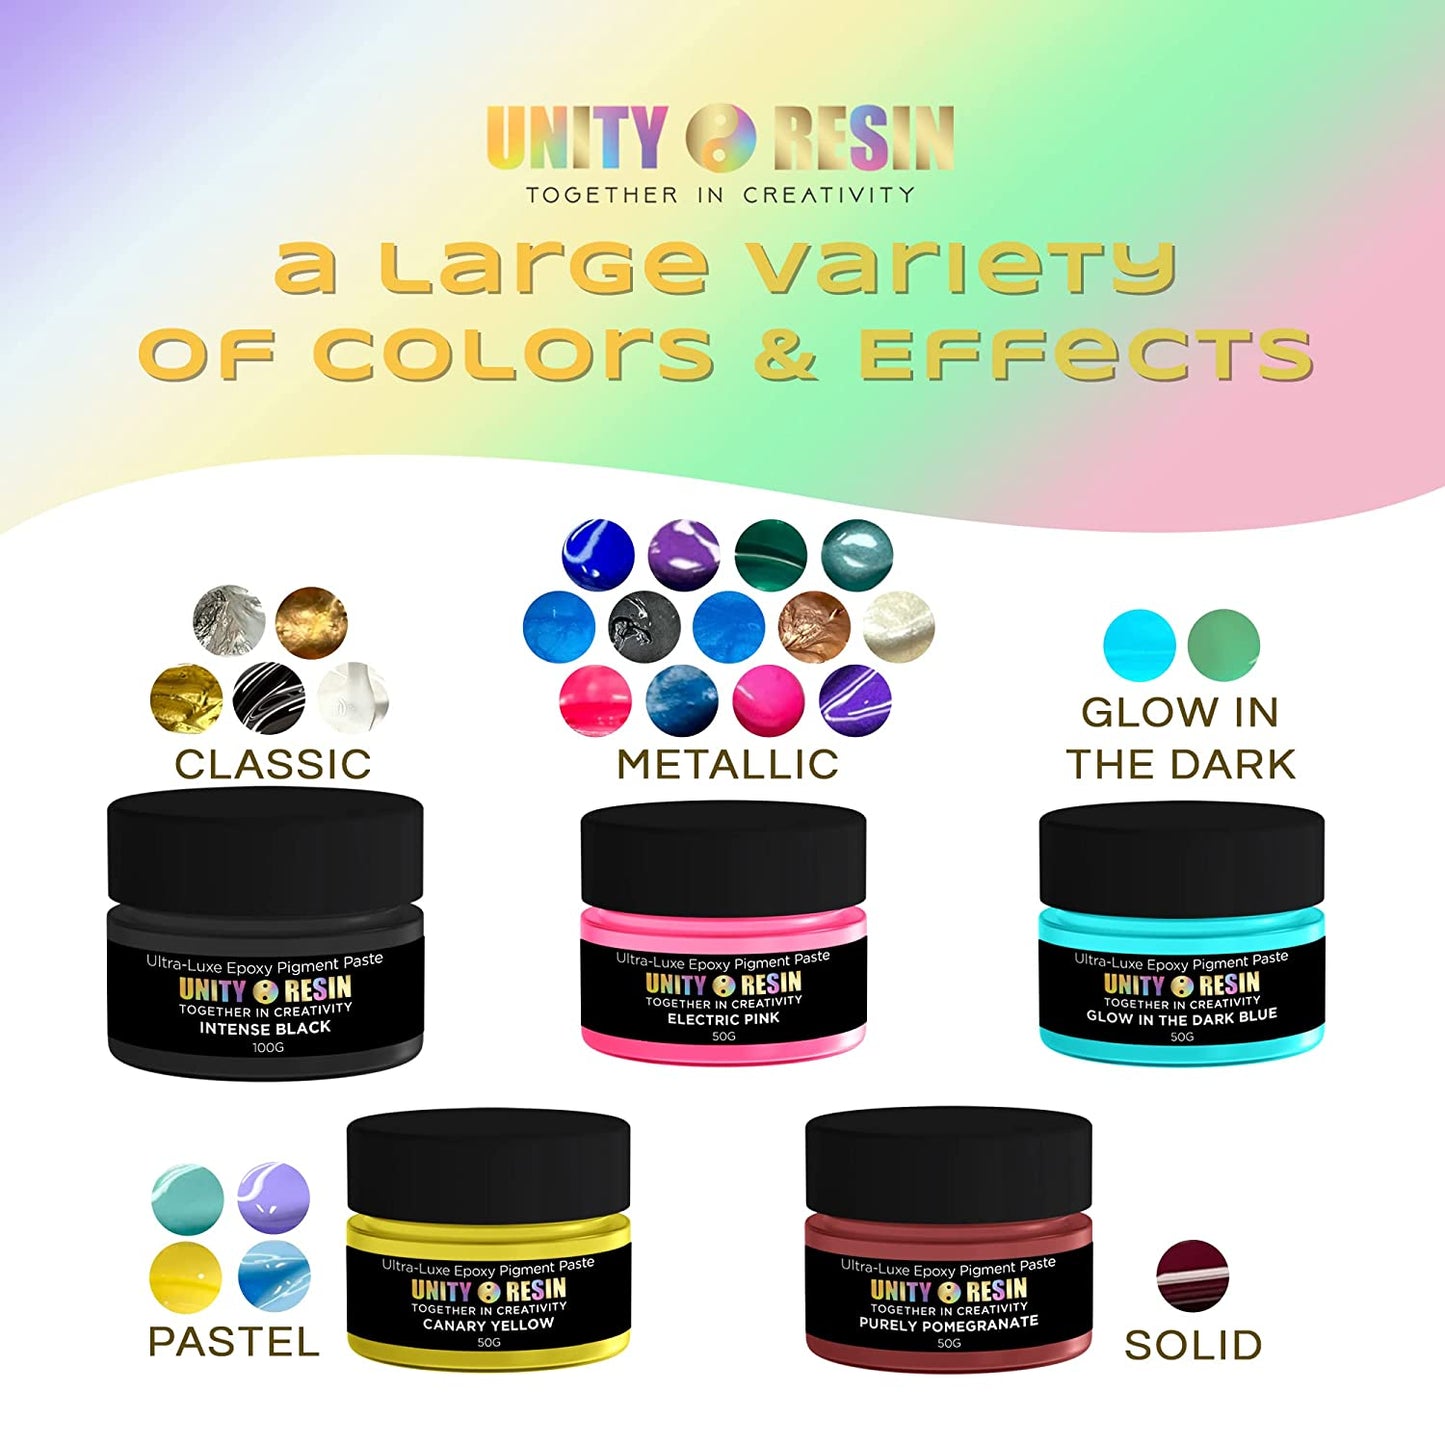 Ultra-Luxe Epoxy Resin Pigment Paste-NIGHT TIDES (50G).